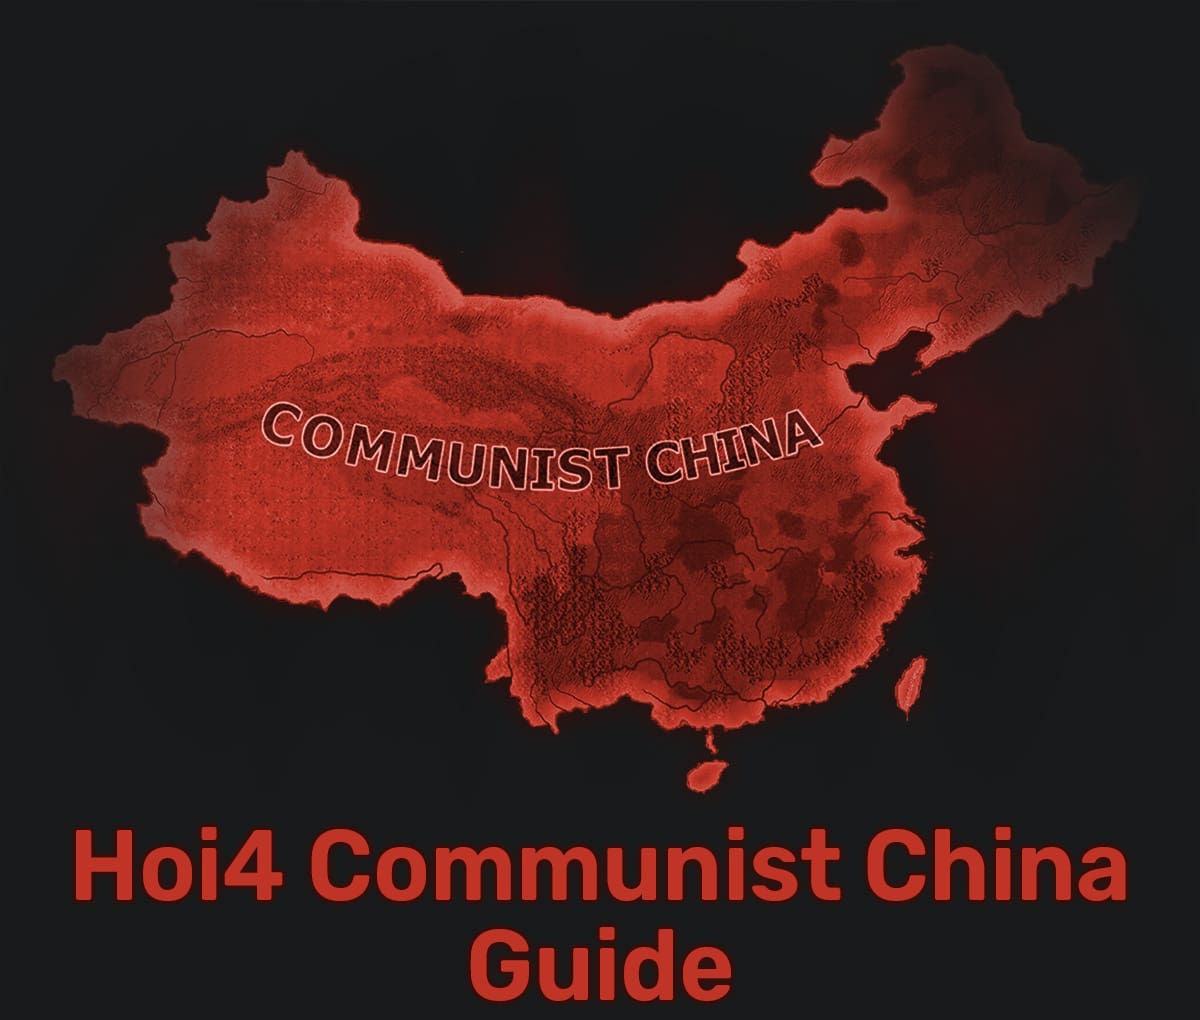 Map of Communist China in hoi4